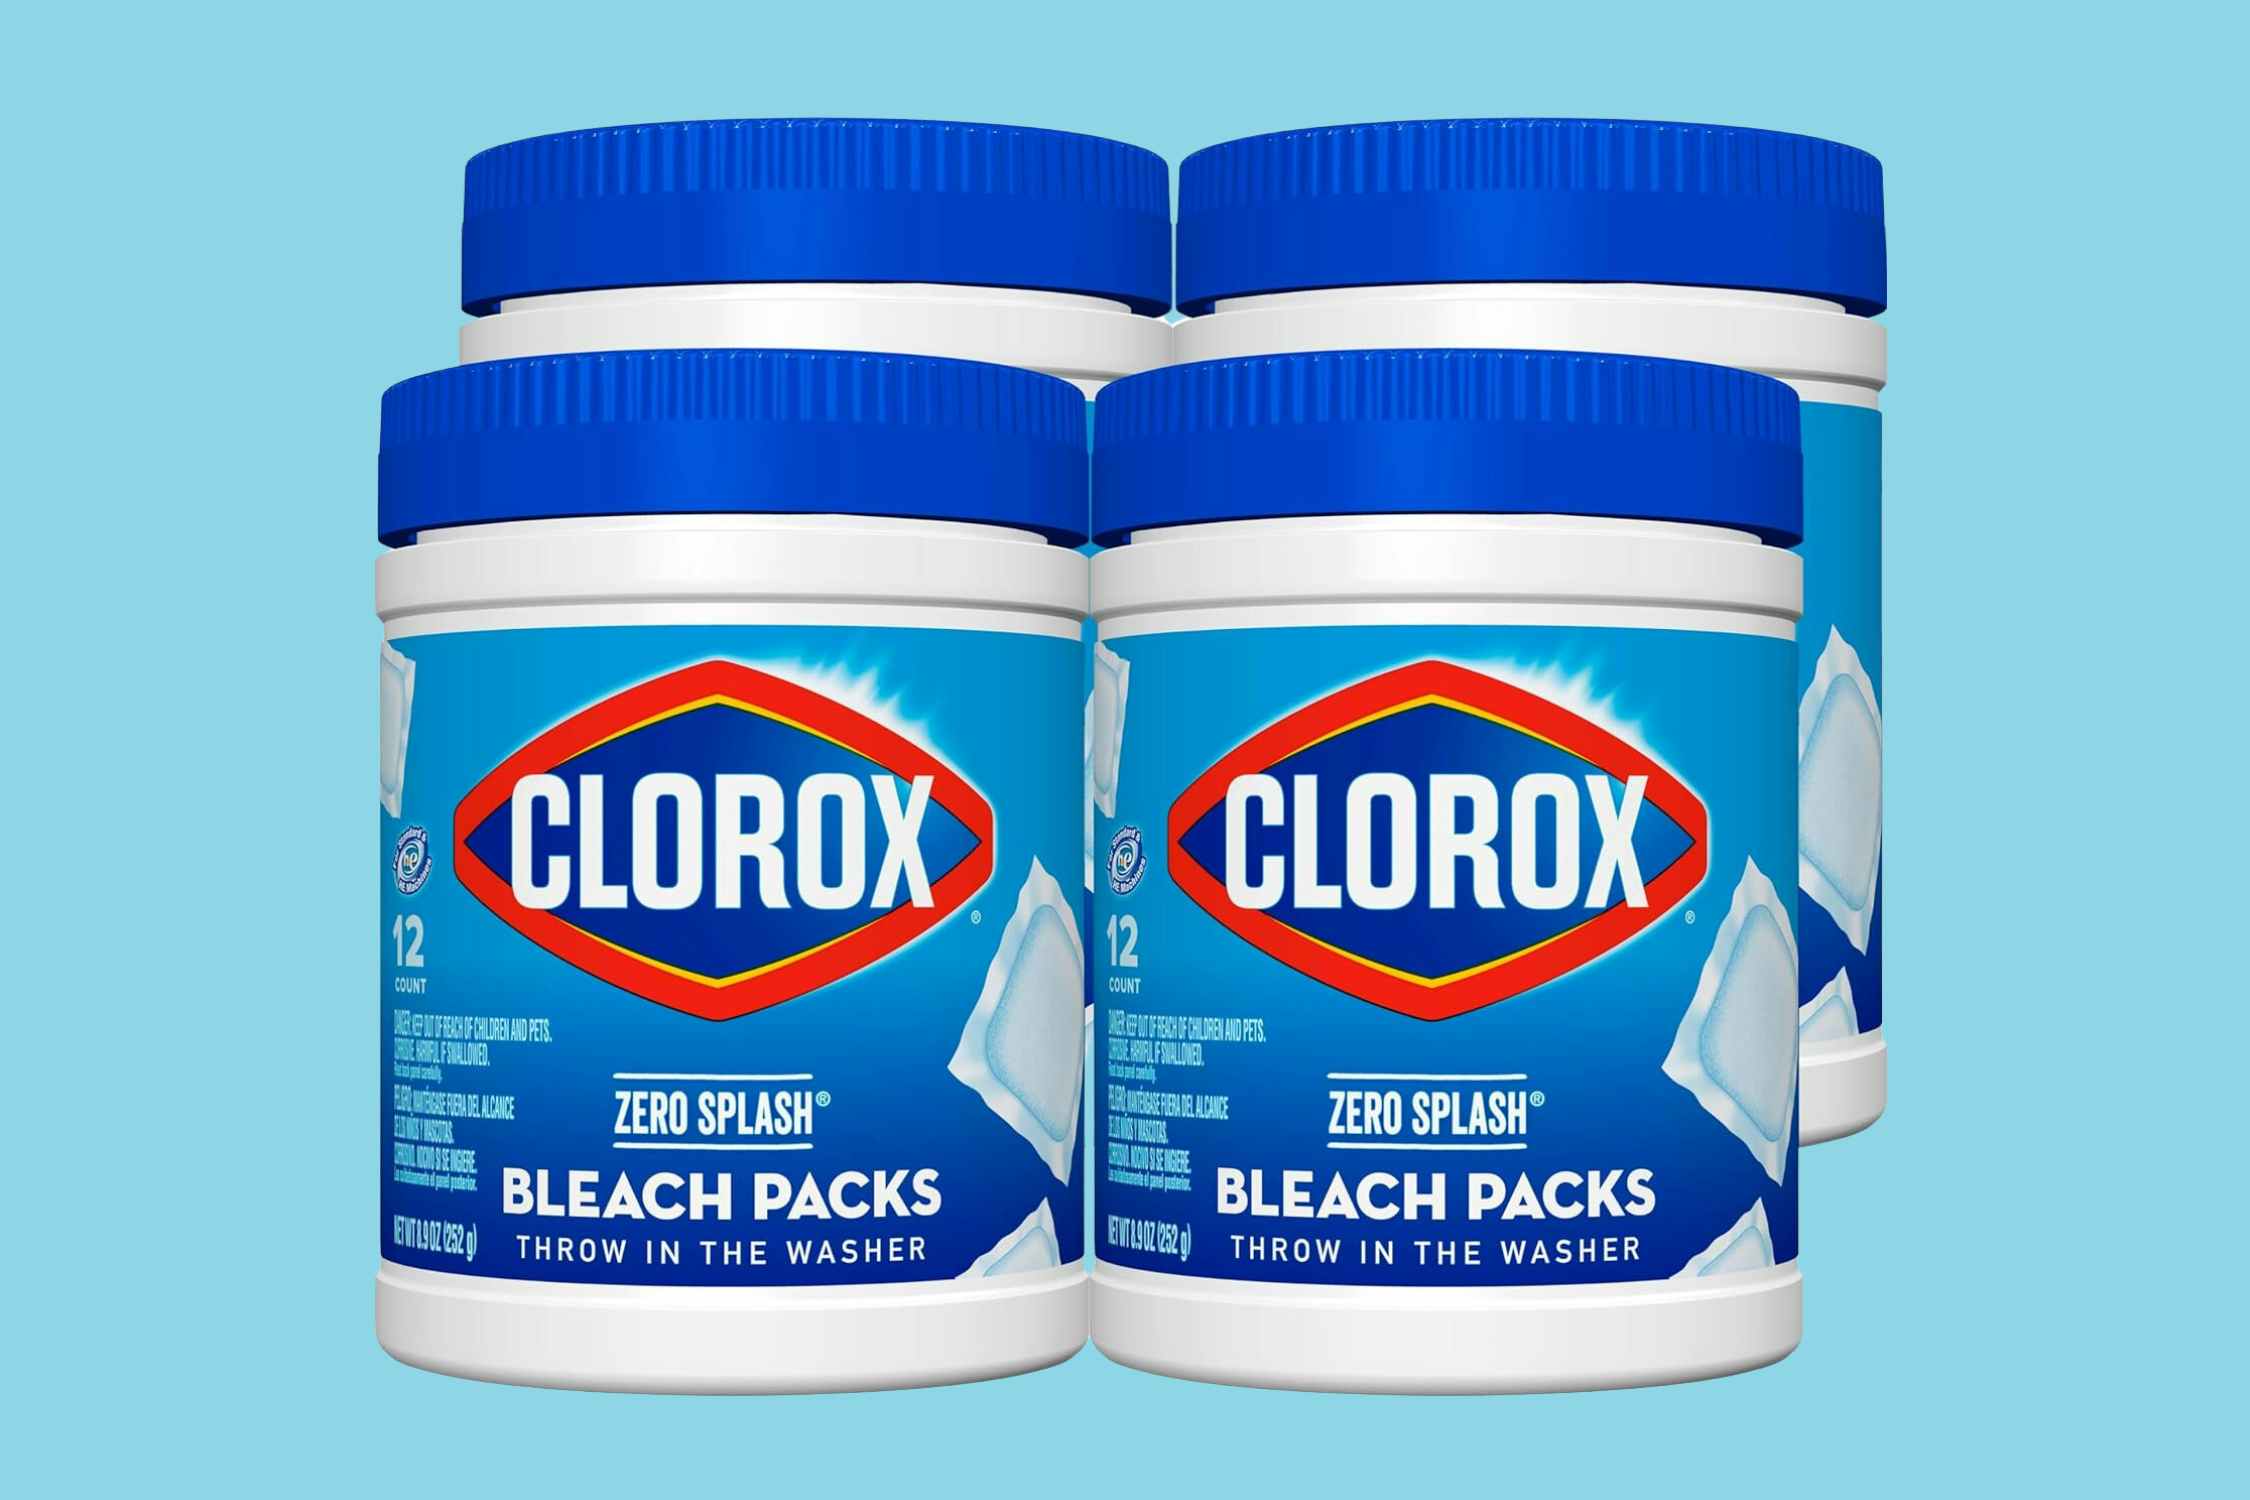 Clorox Bleach 12-Count Packs, as Low as $4.60 Each on Amazon